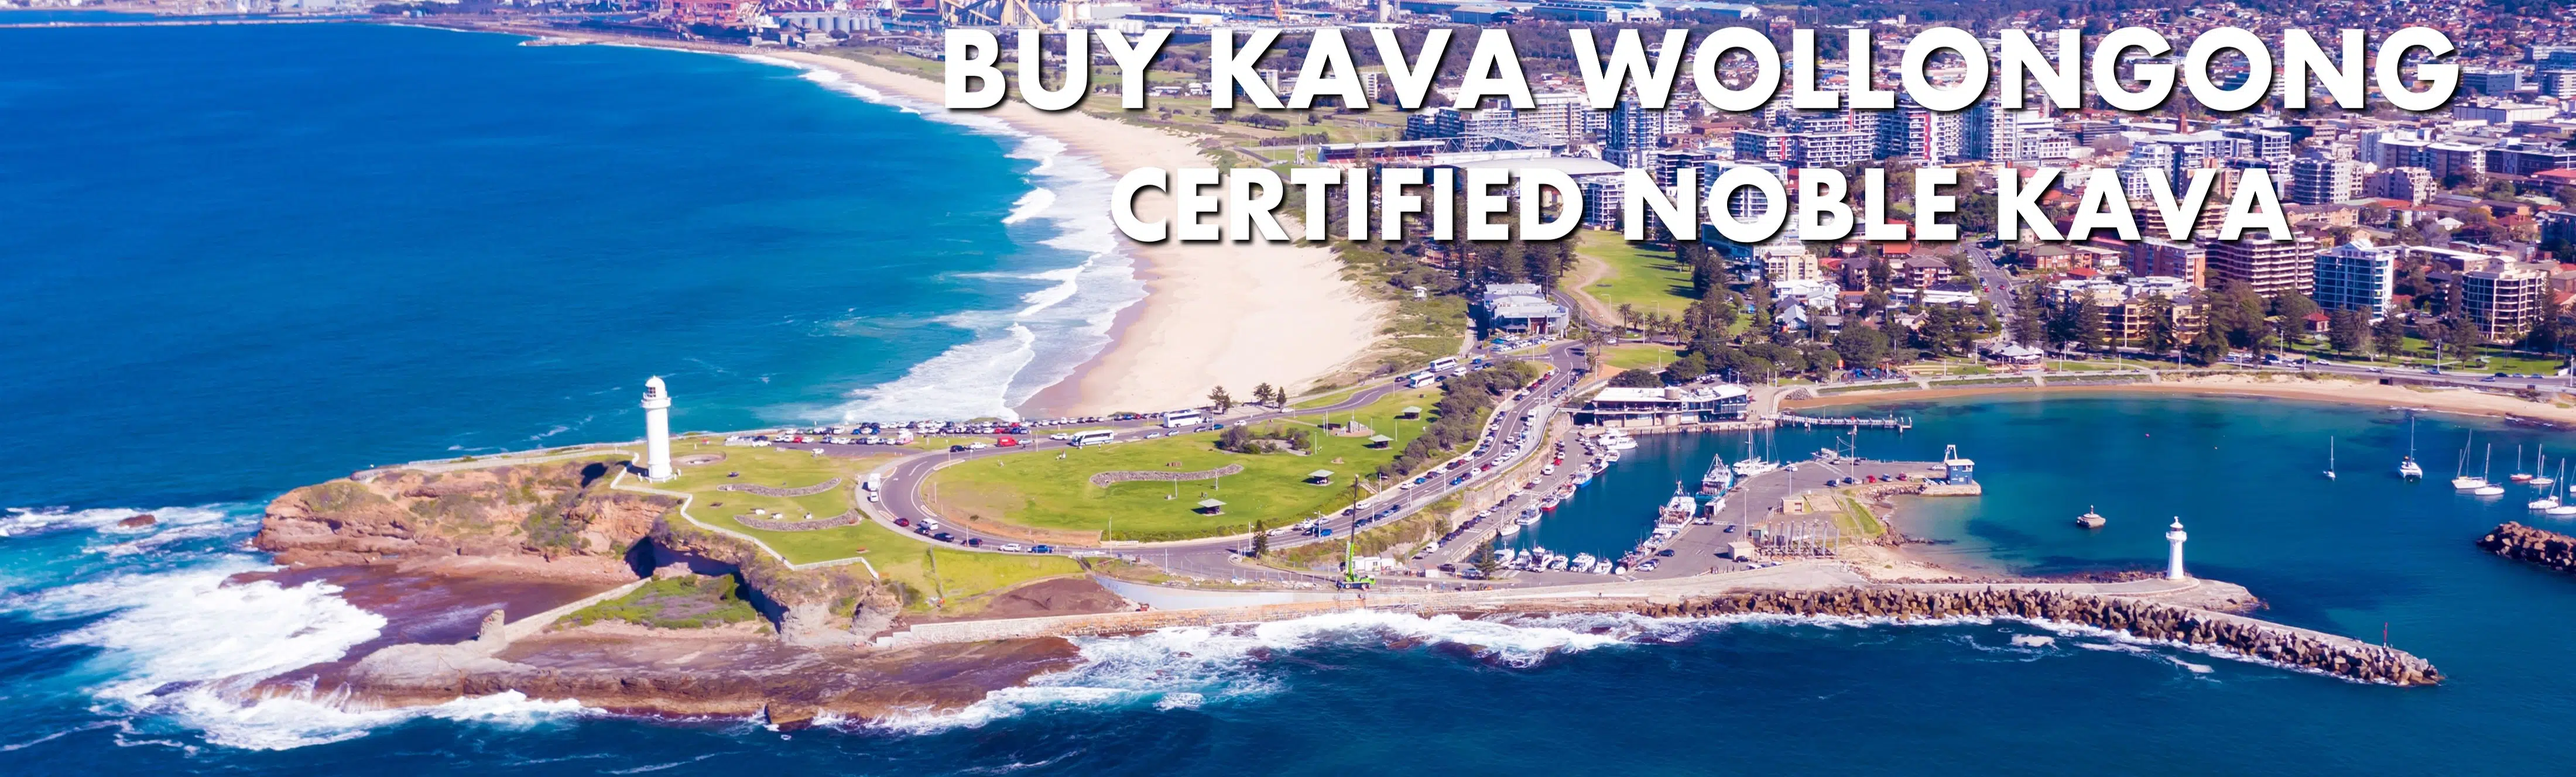 Aerial view of Wollongong New South Wales with the description - "Buy Kava in Wollongong Certified Noble Kava"